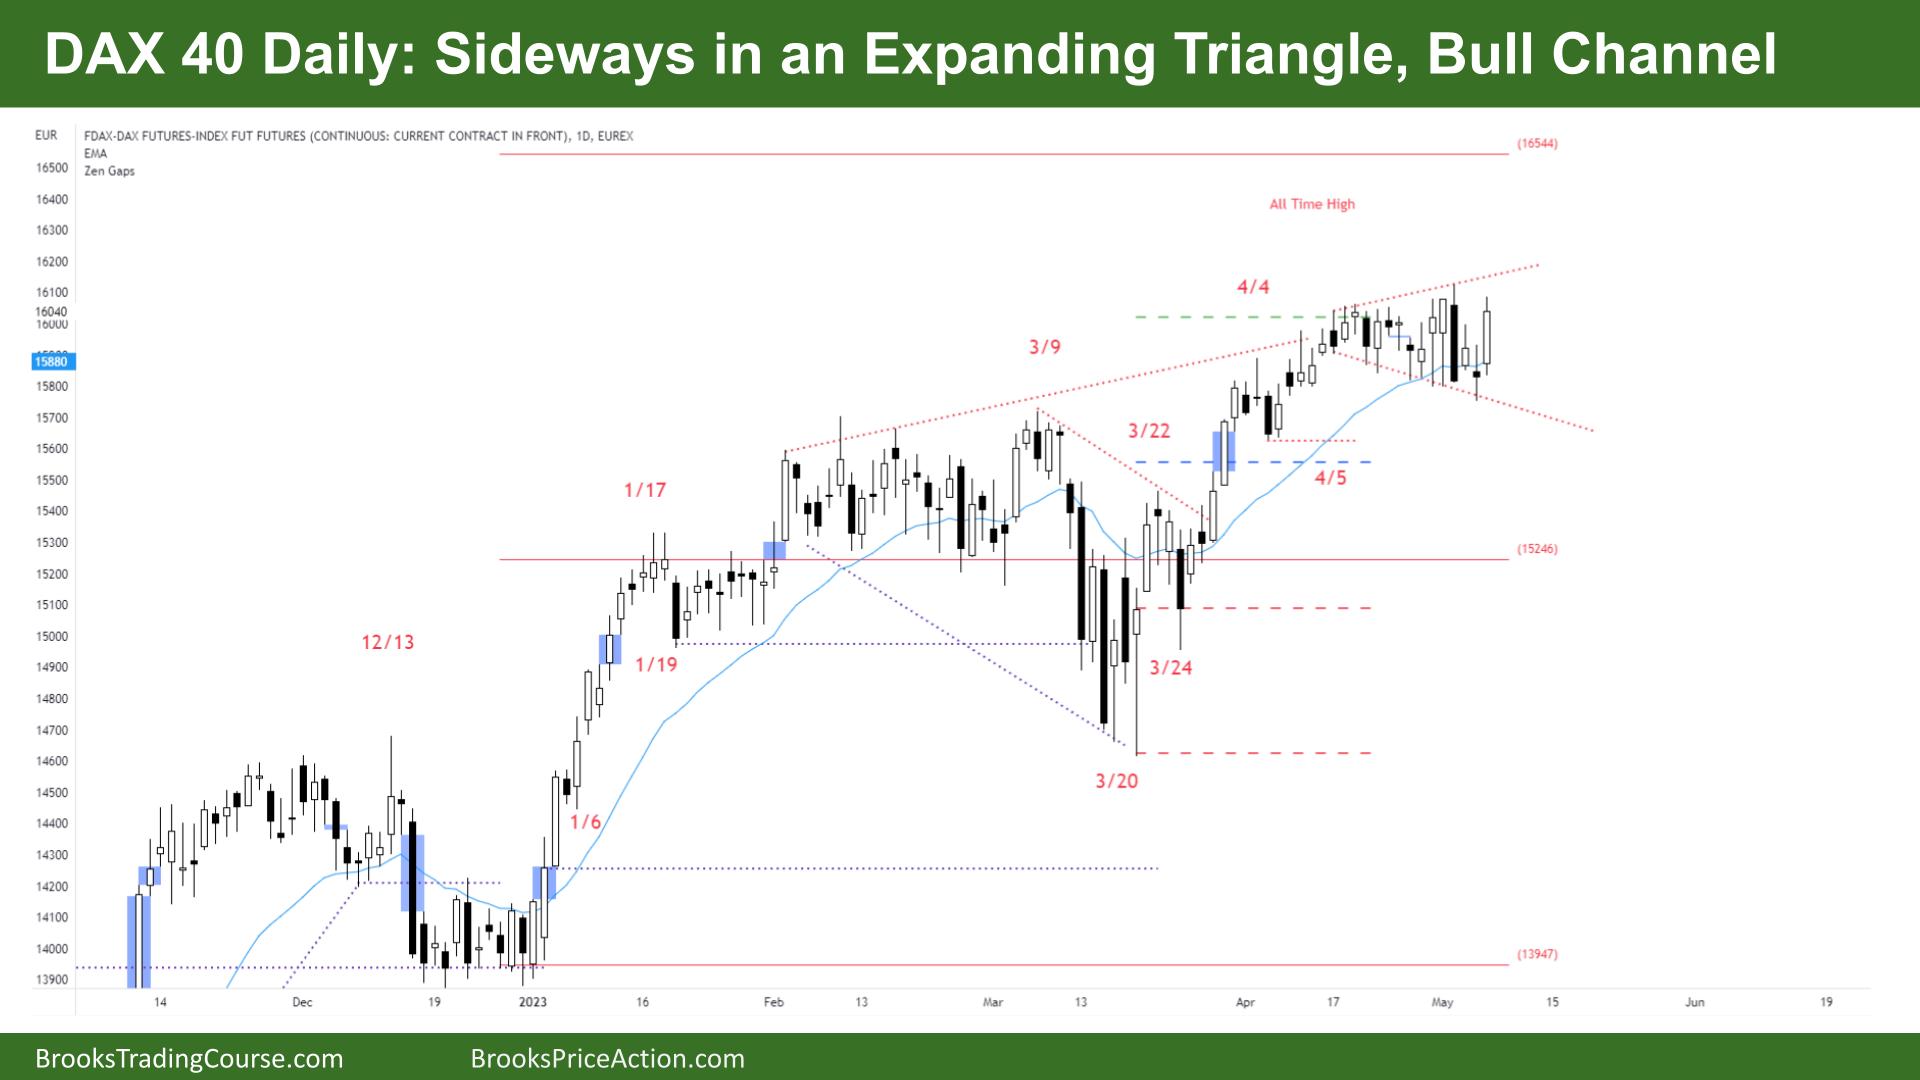 DAX 40 Sideways in an Expanding Triangle, Bull Channel